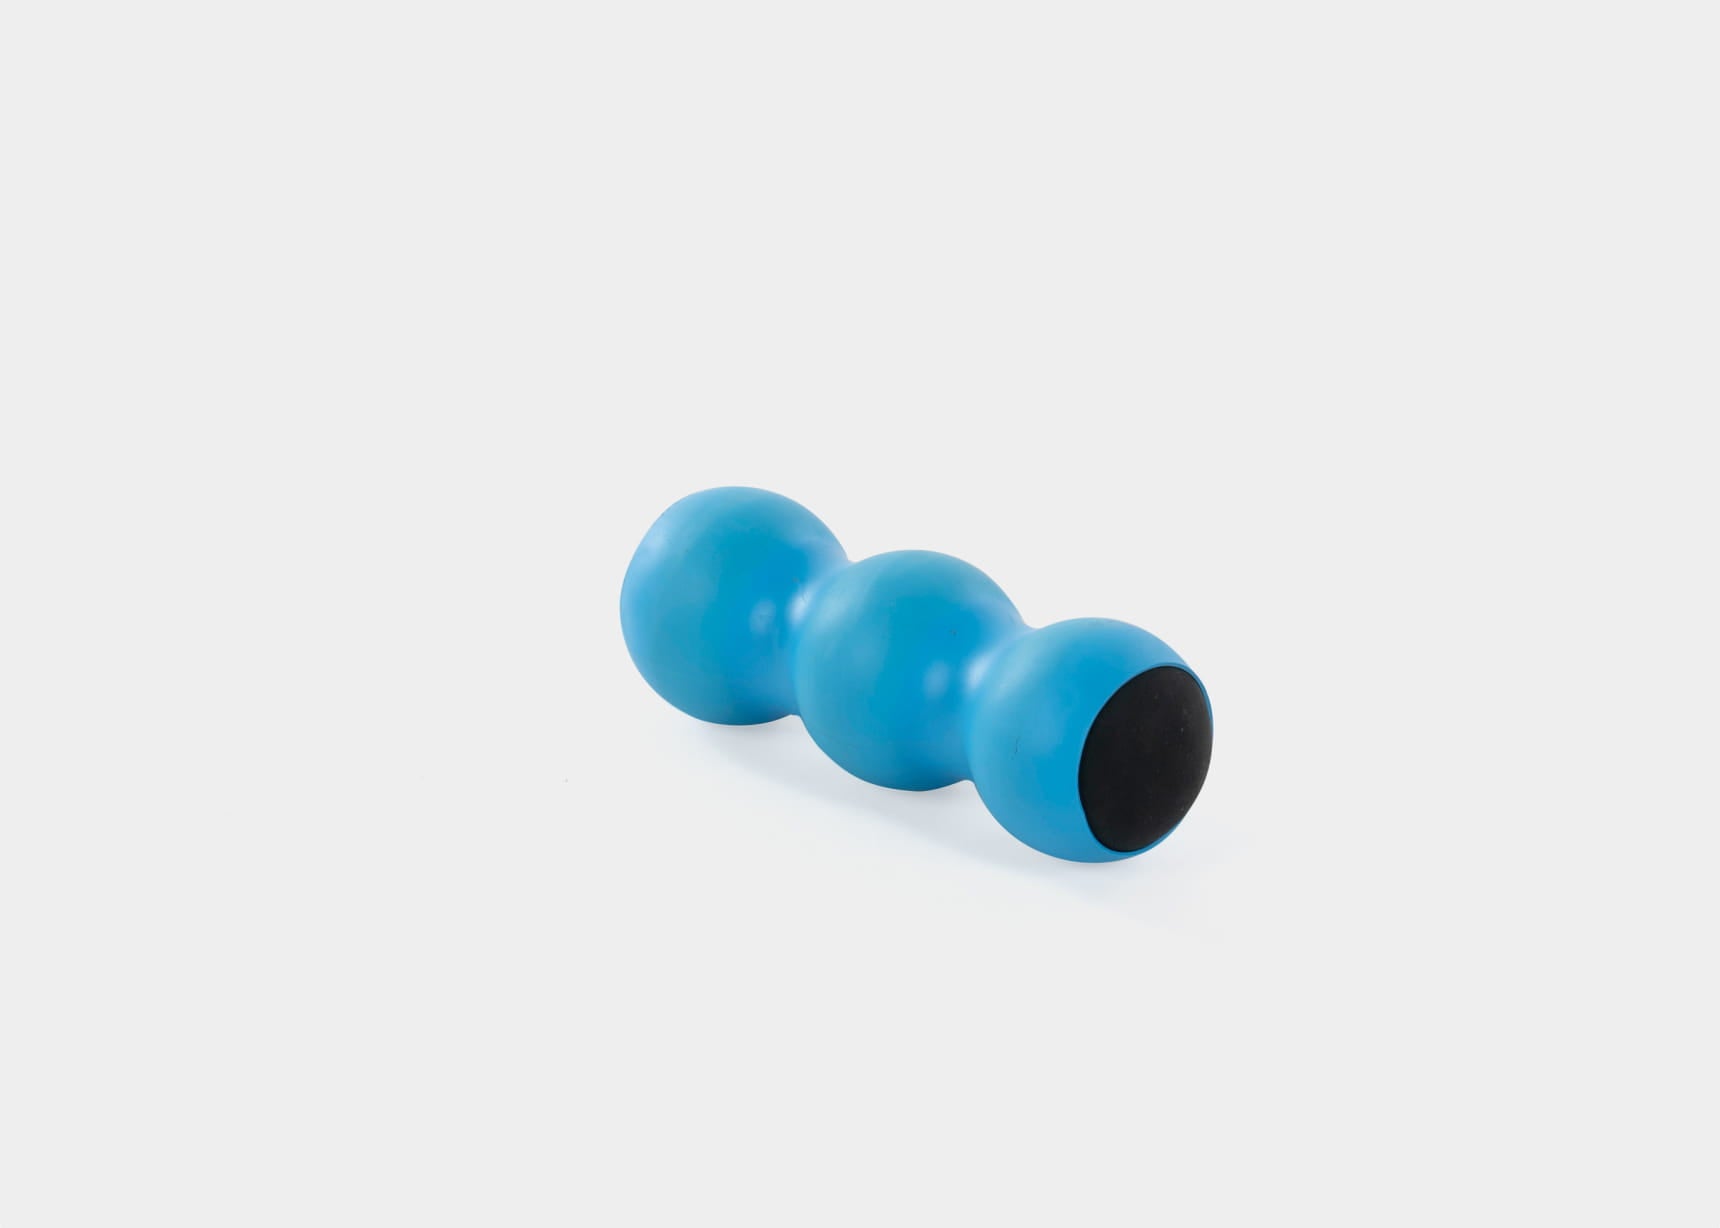 Blue KnotOut massage tool for muscle relief.